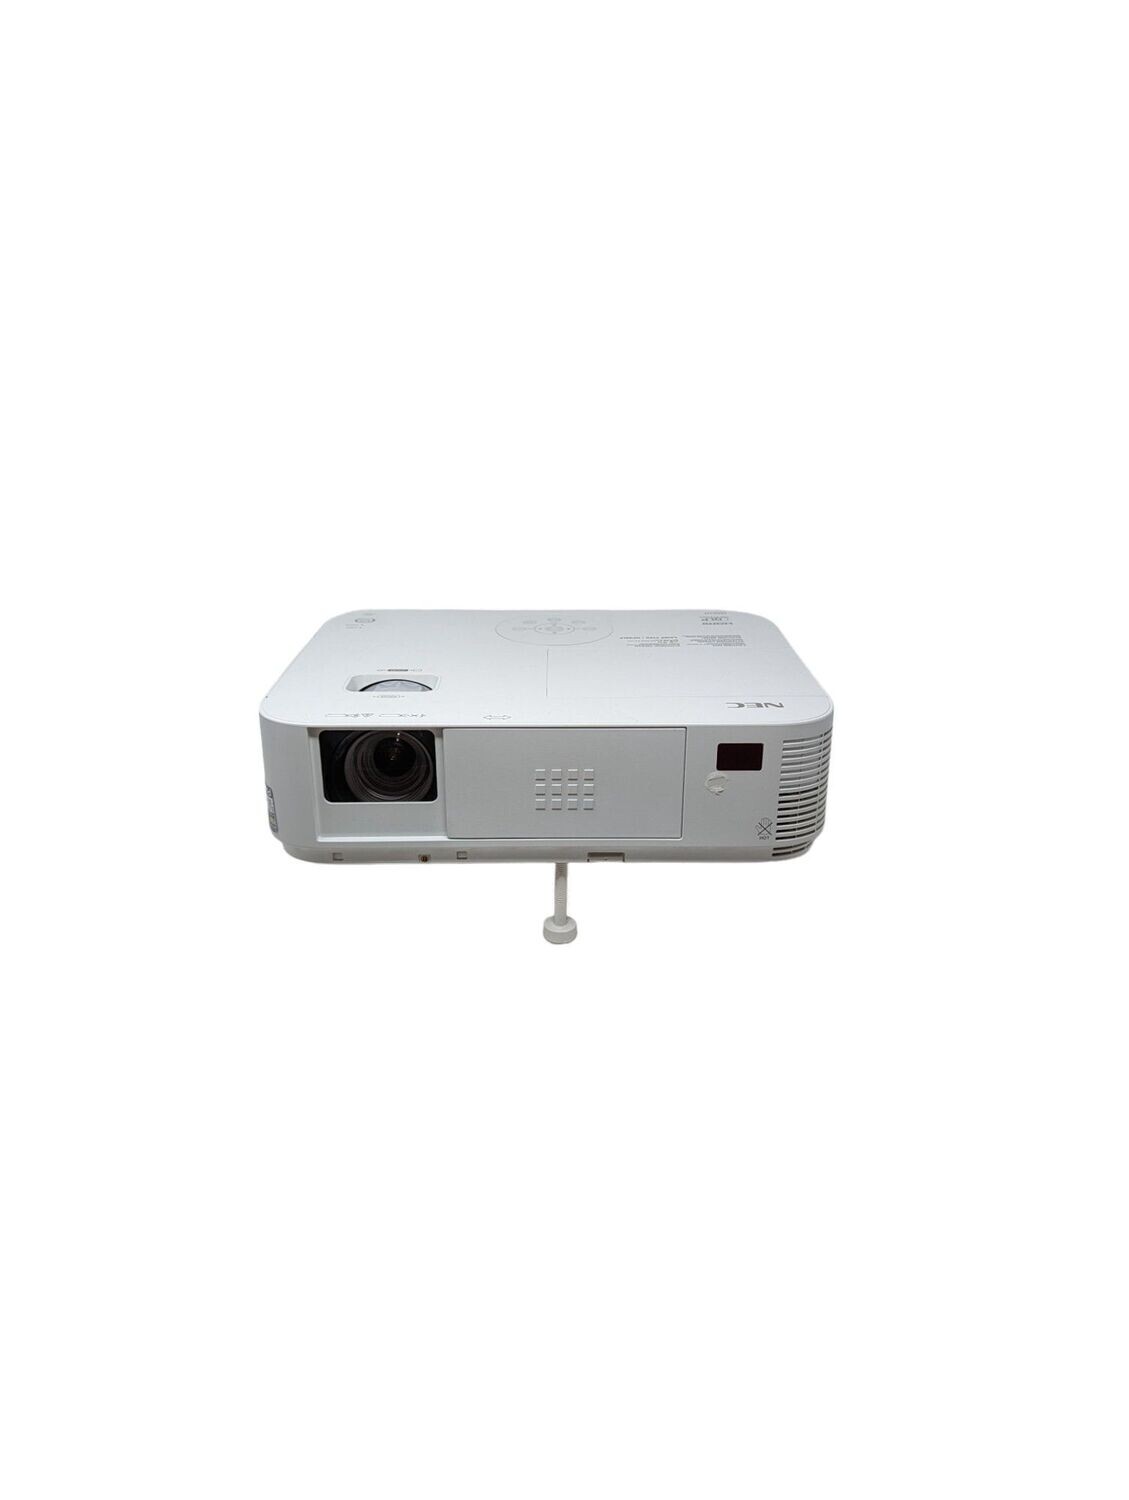 NEC NP-M403H 1080P Conference Room Projector 2071Lamp Hours